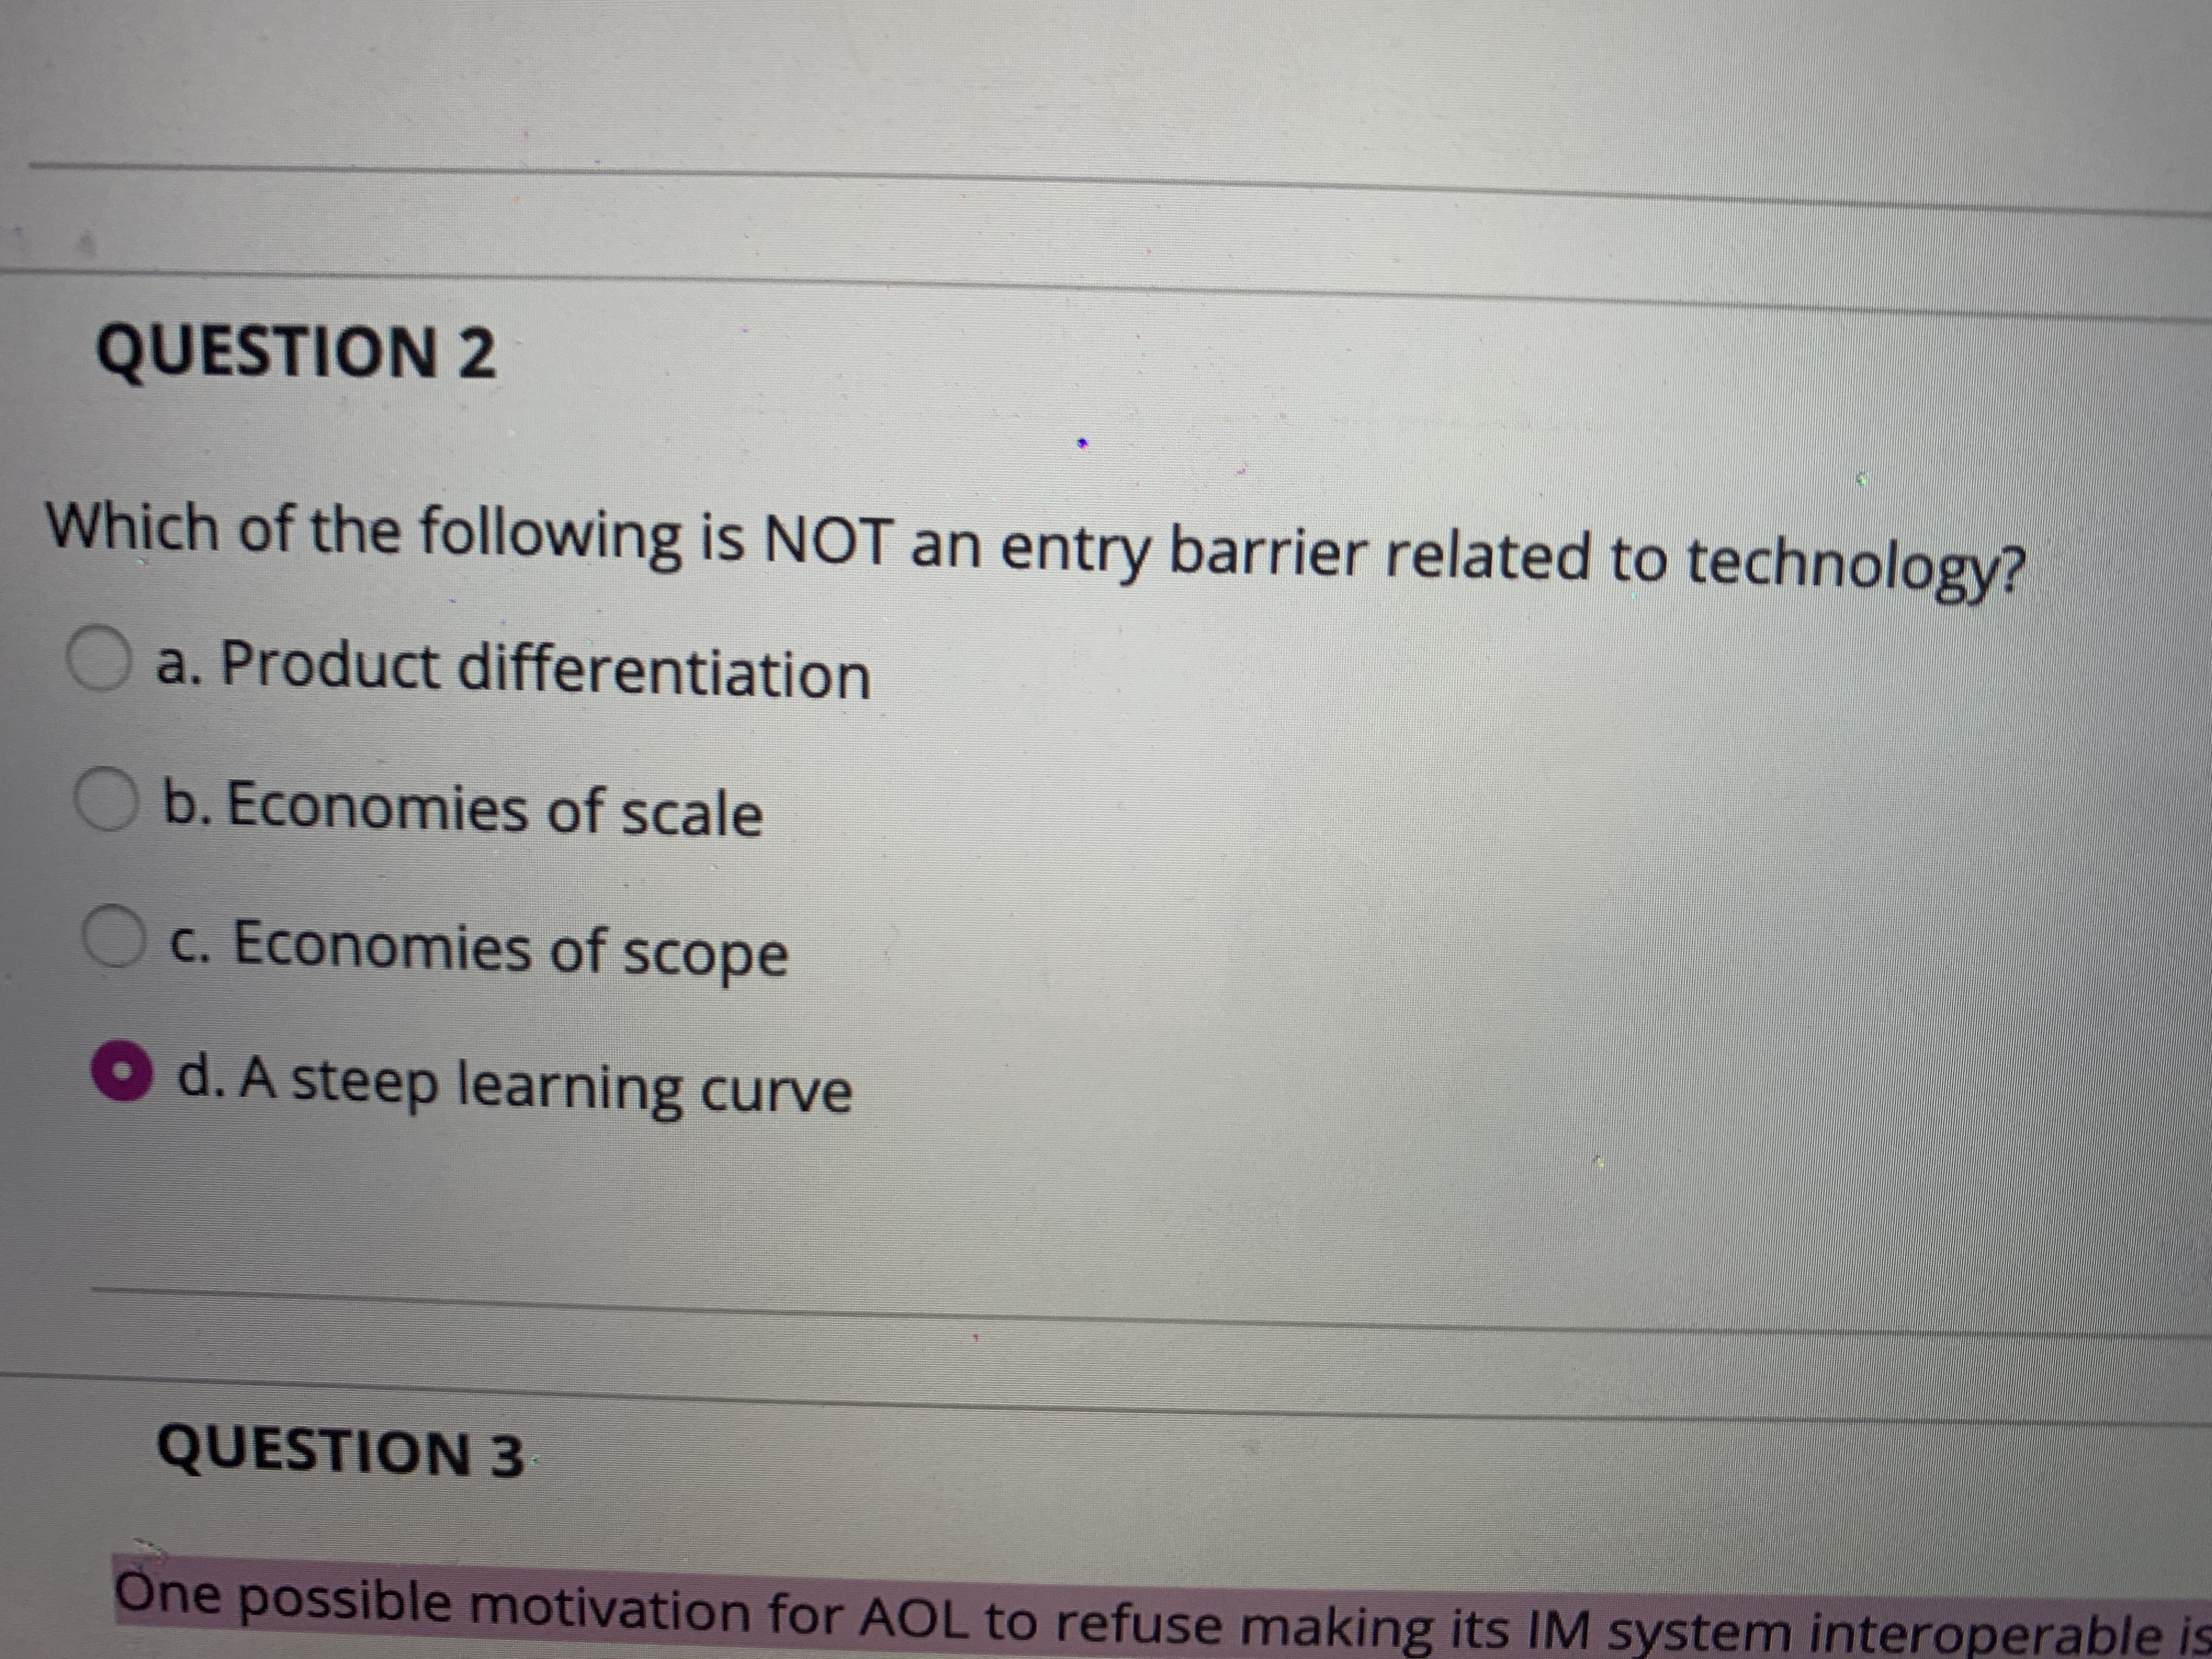 Which of the following is NOT an entry barrier related to technology?
